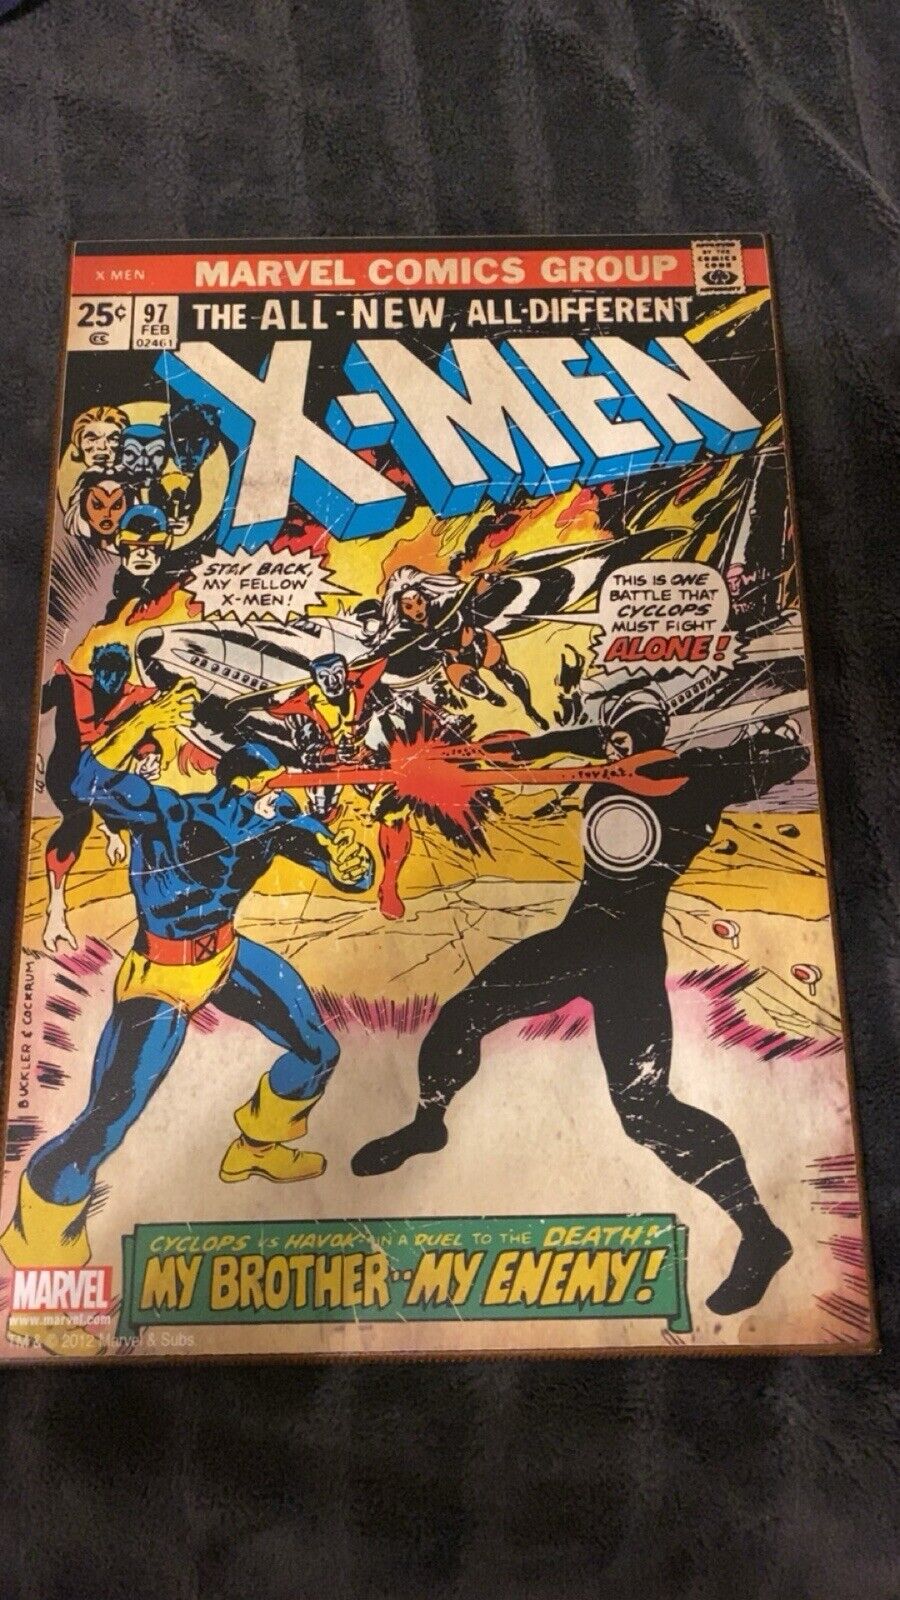 The Uncanny X-Men Issue 97 Poster Havok vs Cyclops My Brother My Enemy